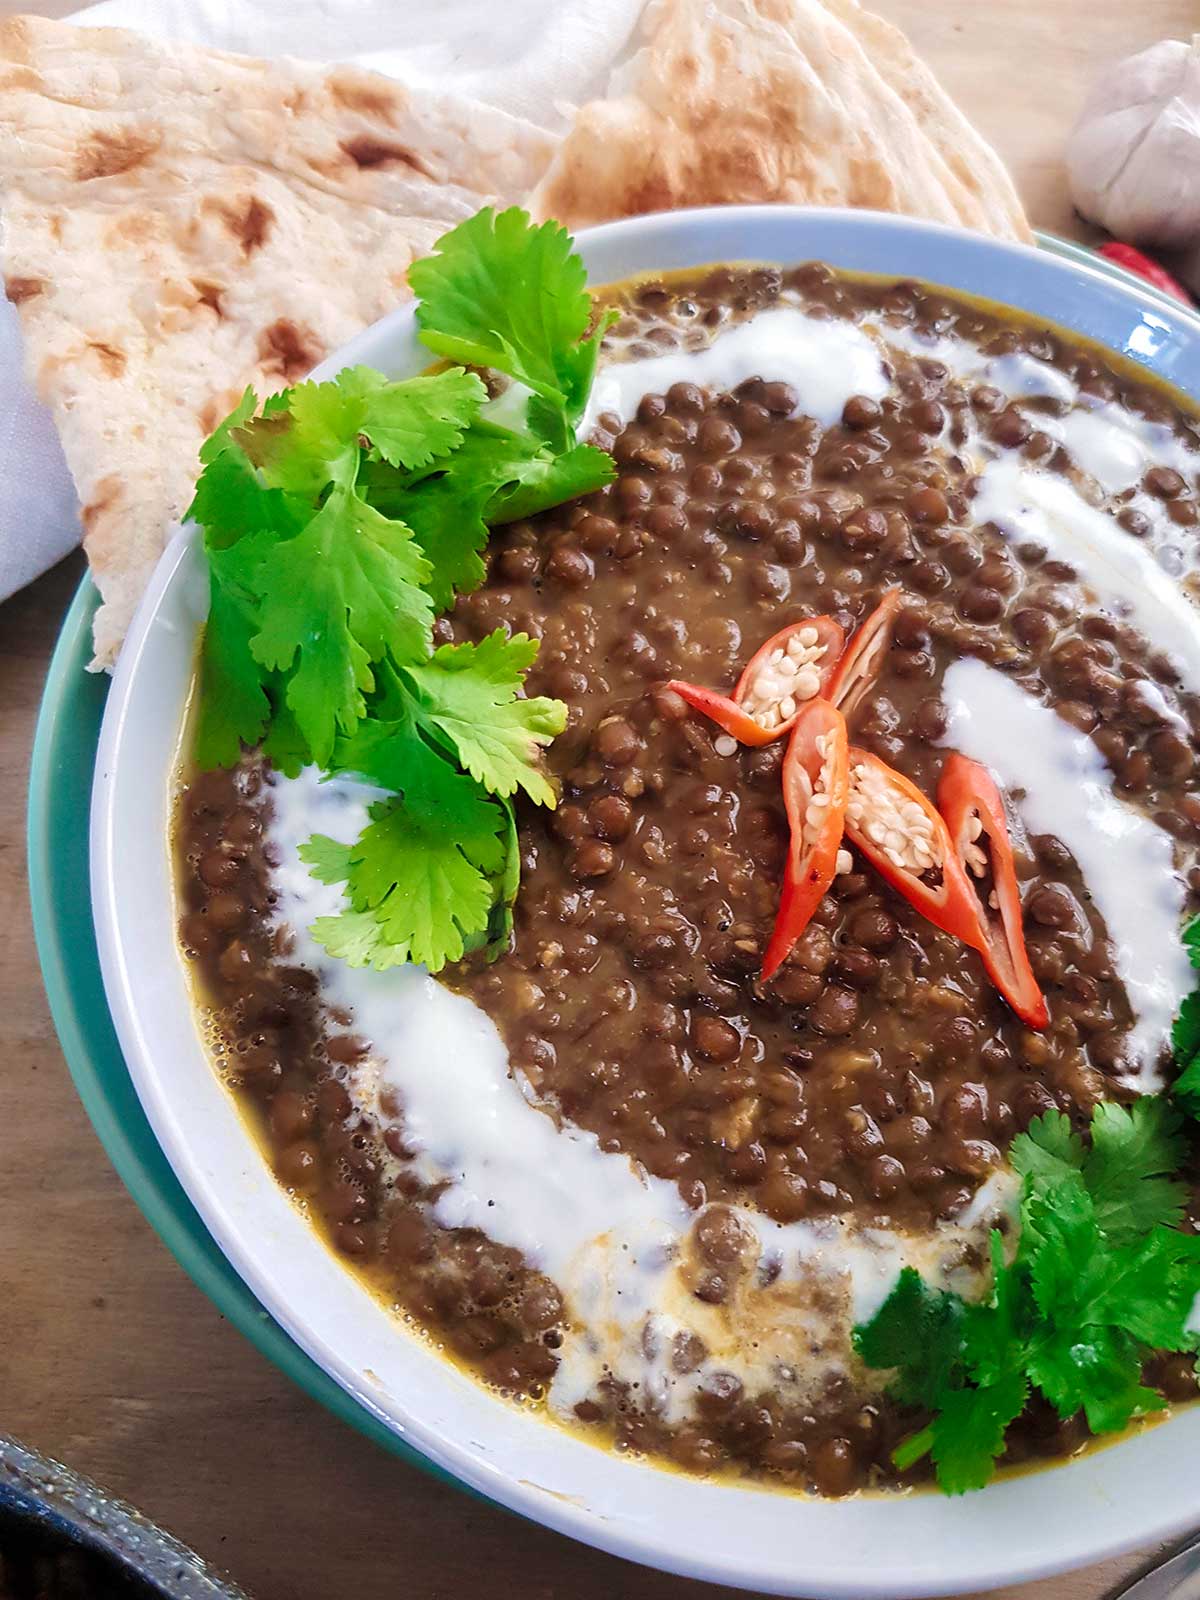 Whole masoor dal served in a white bowl garnished with green cilantro leaves, coconut cream and red chilies.